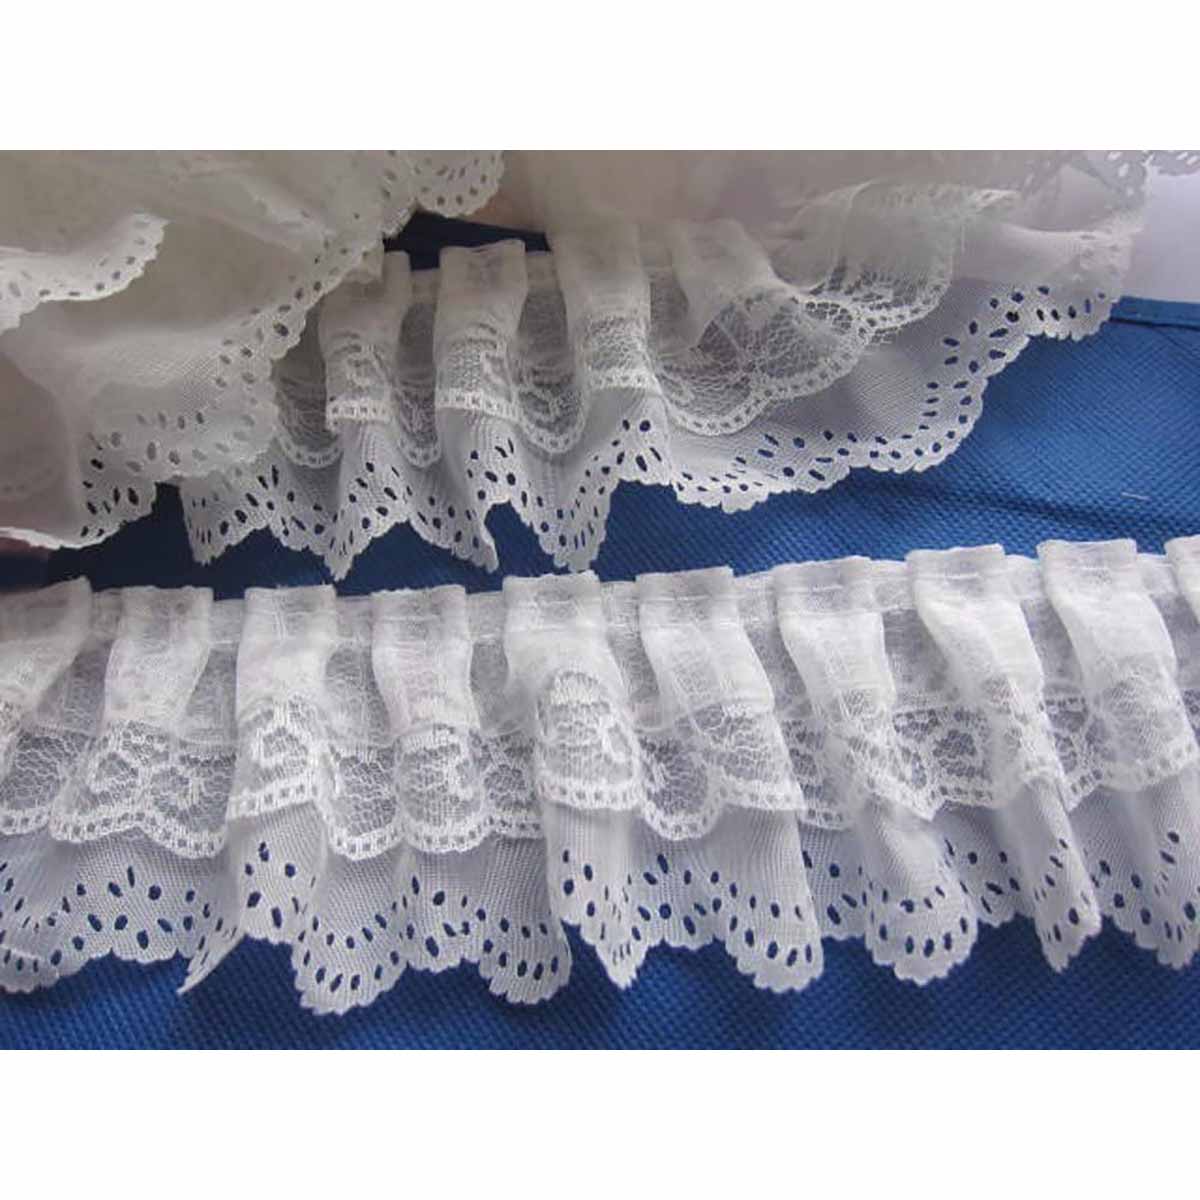 Frill Lace - Cream  Imported Craft Laces - Crafteroof